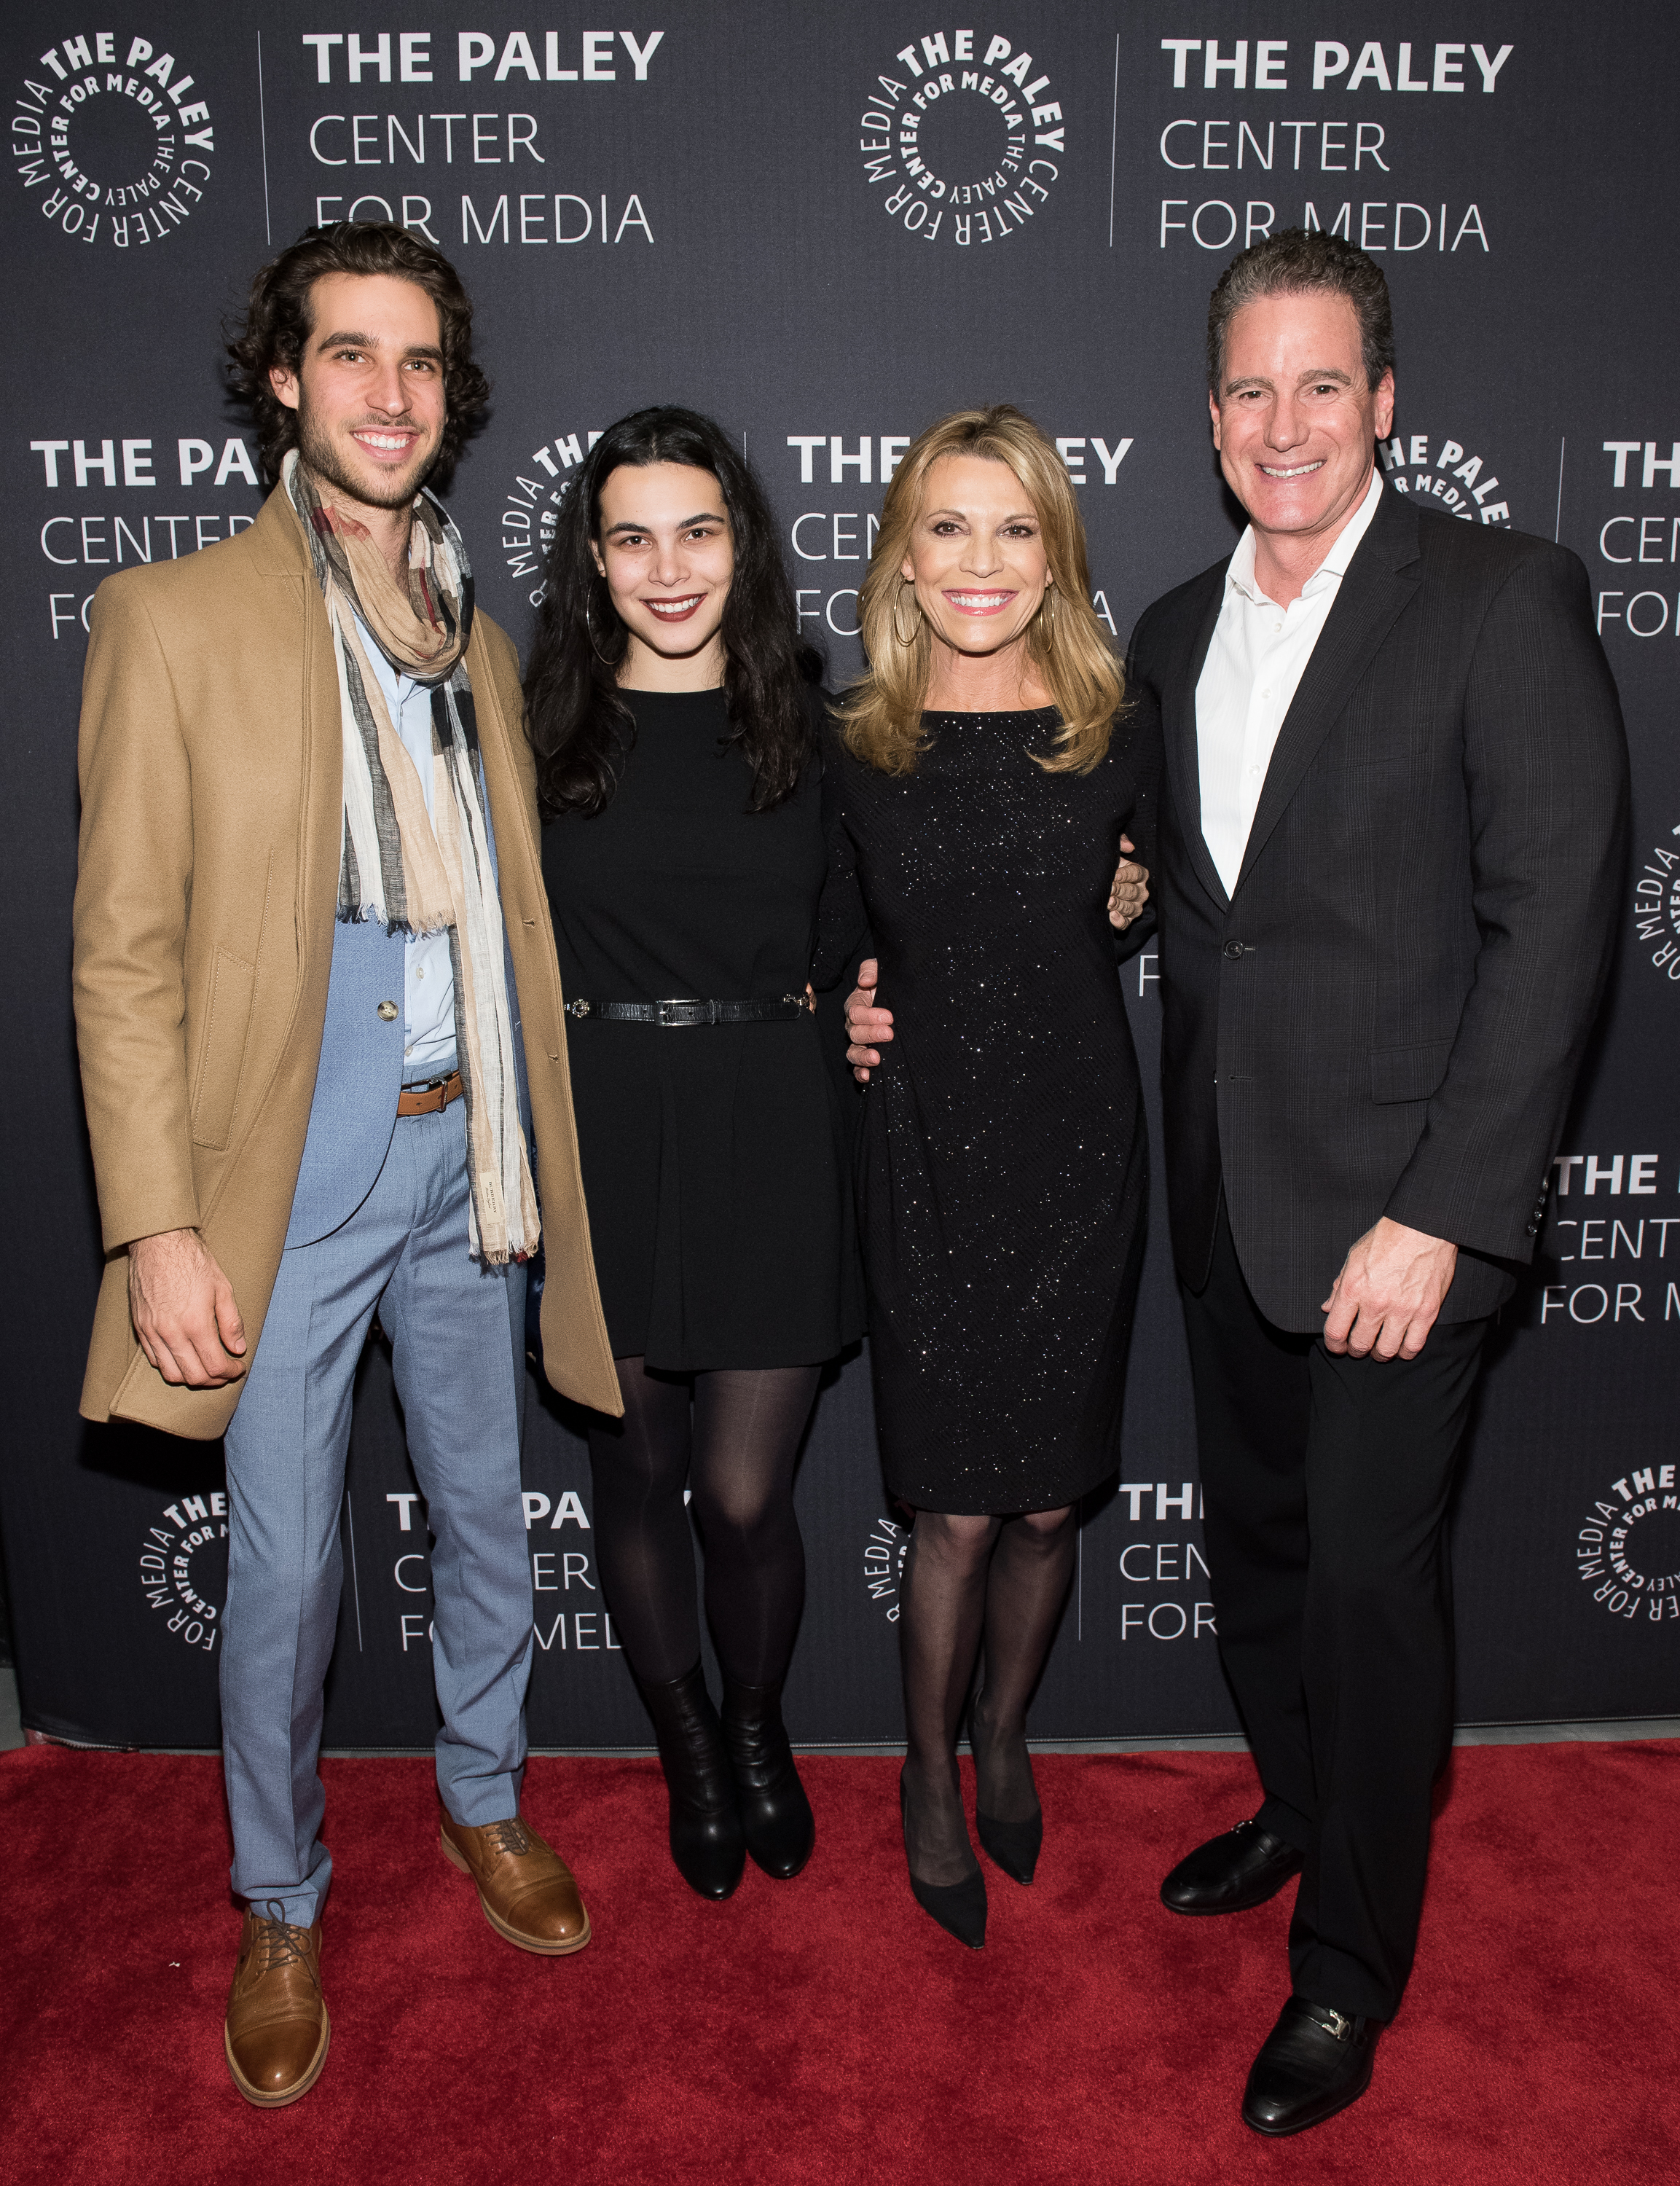 Nikko Santo Pietro, Gigi Santo Pietro, Vanna White, and George Santo Pietro attend The Paley Center For Media Presents: Wheel Of Fortune: 35 Years As America's Game at The Paley Center for Media on November 15, 2017 in New York City. | Source: Getty Images